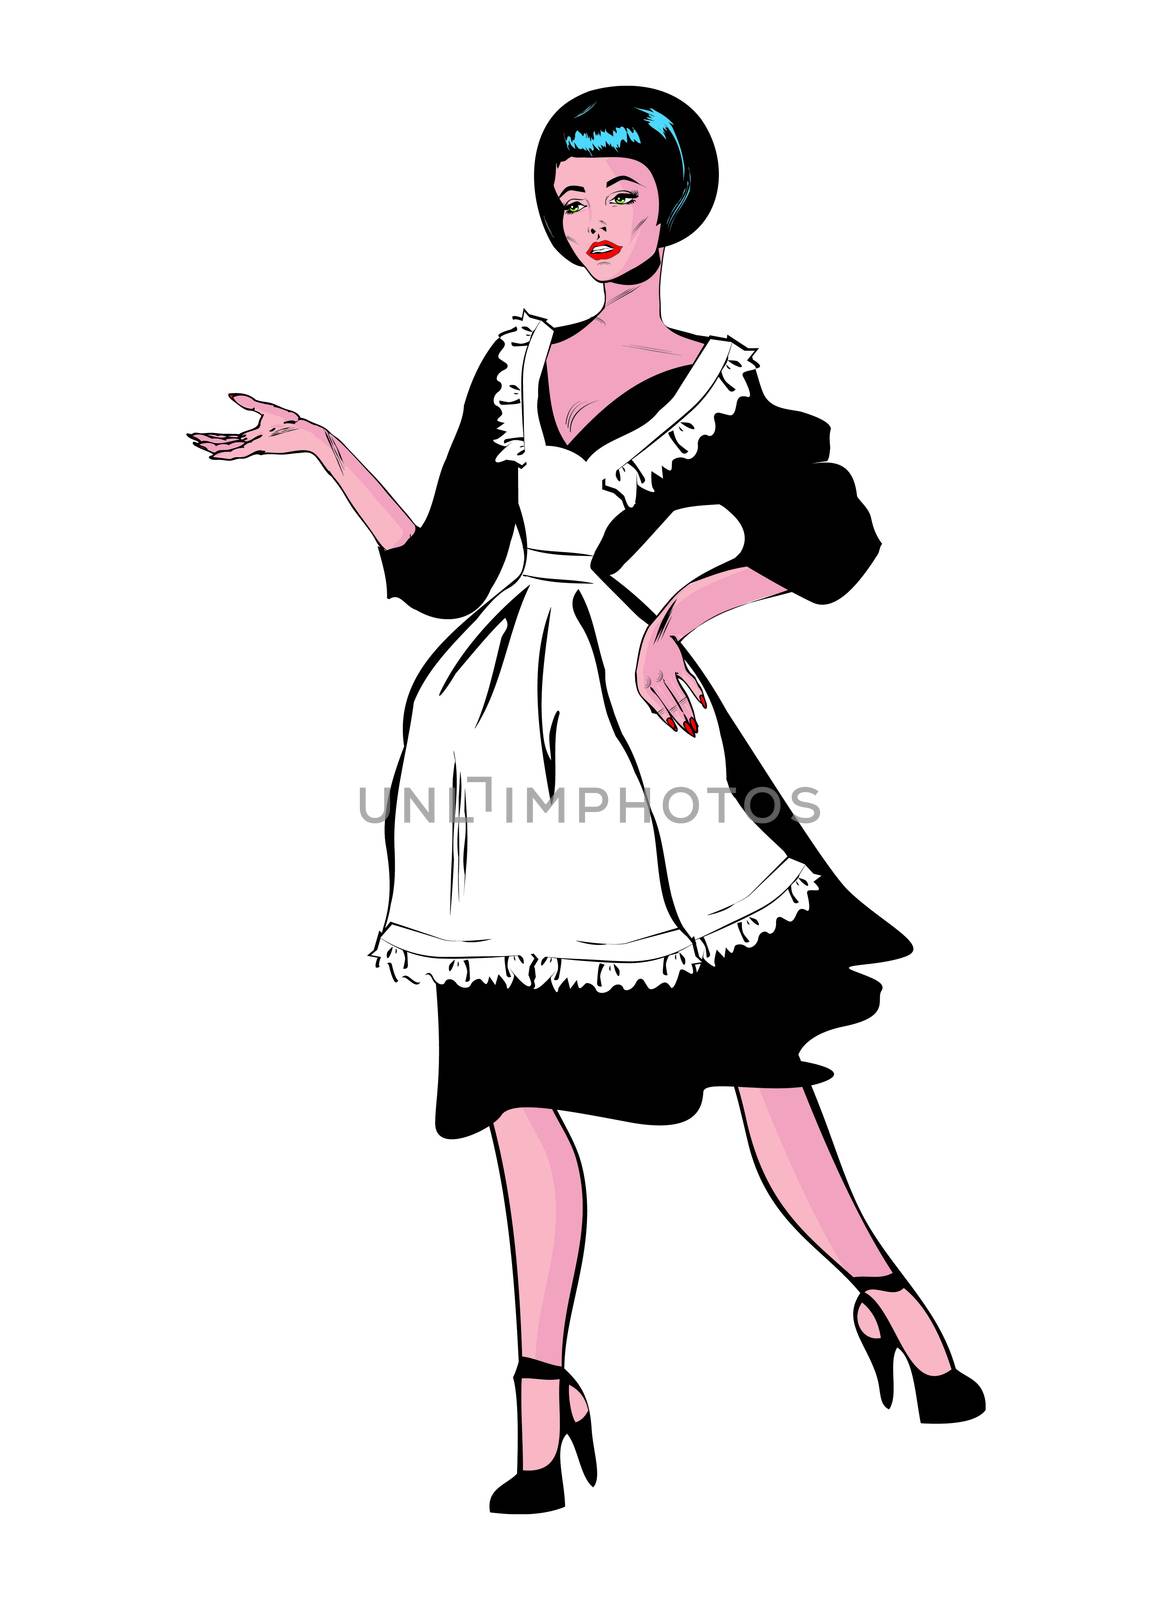 Helpful Housewife - Retro Clip Art in popart vintage style by IconsJewelry